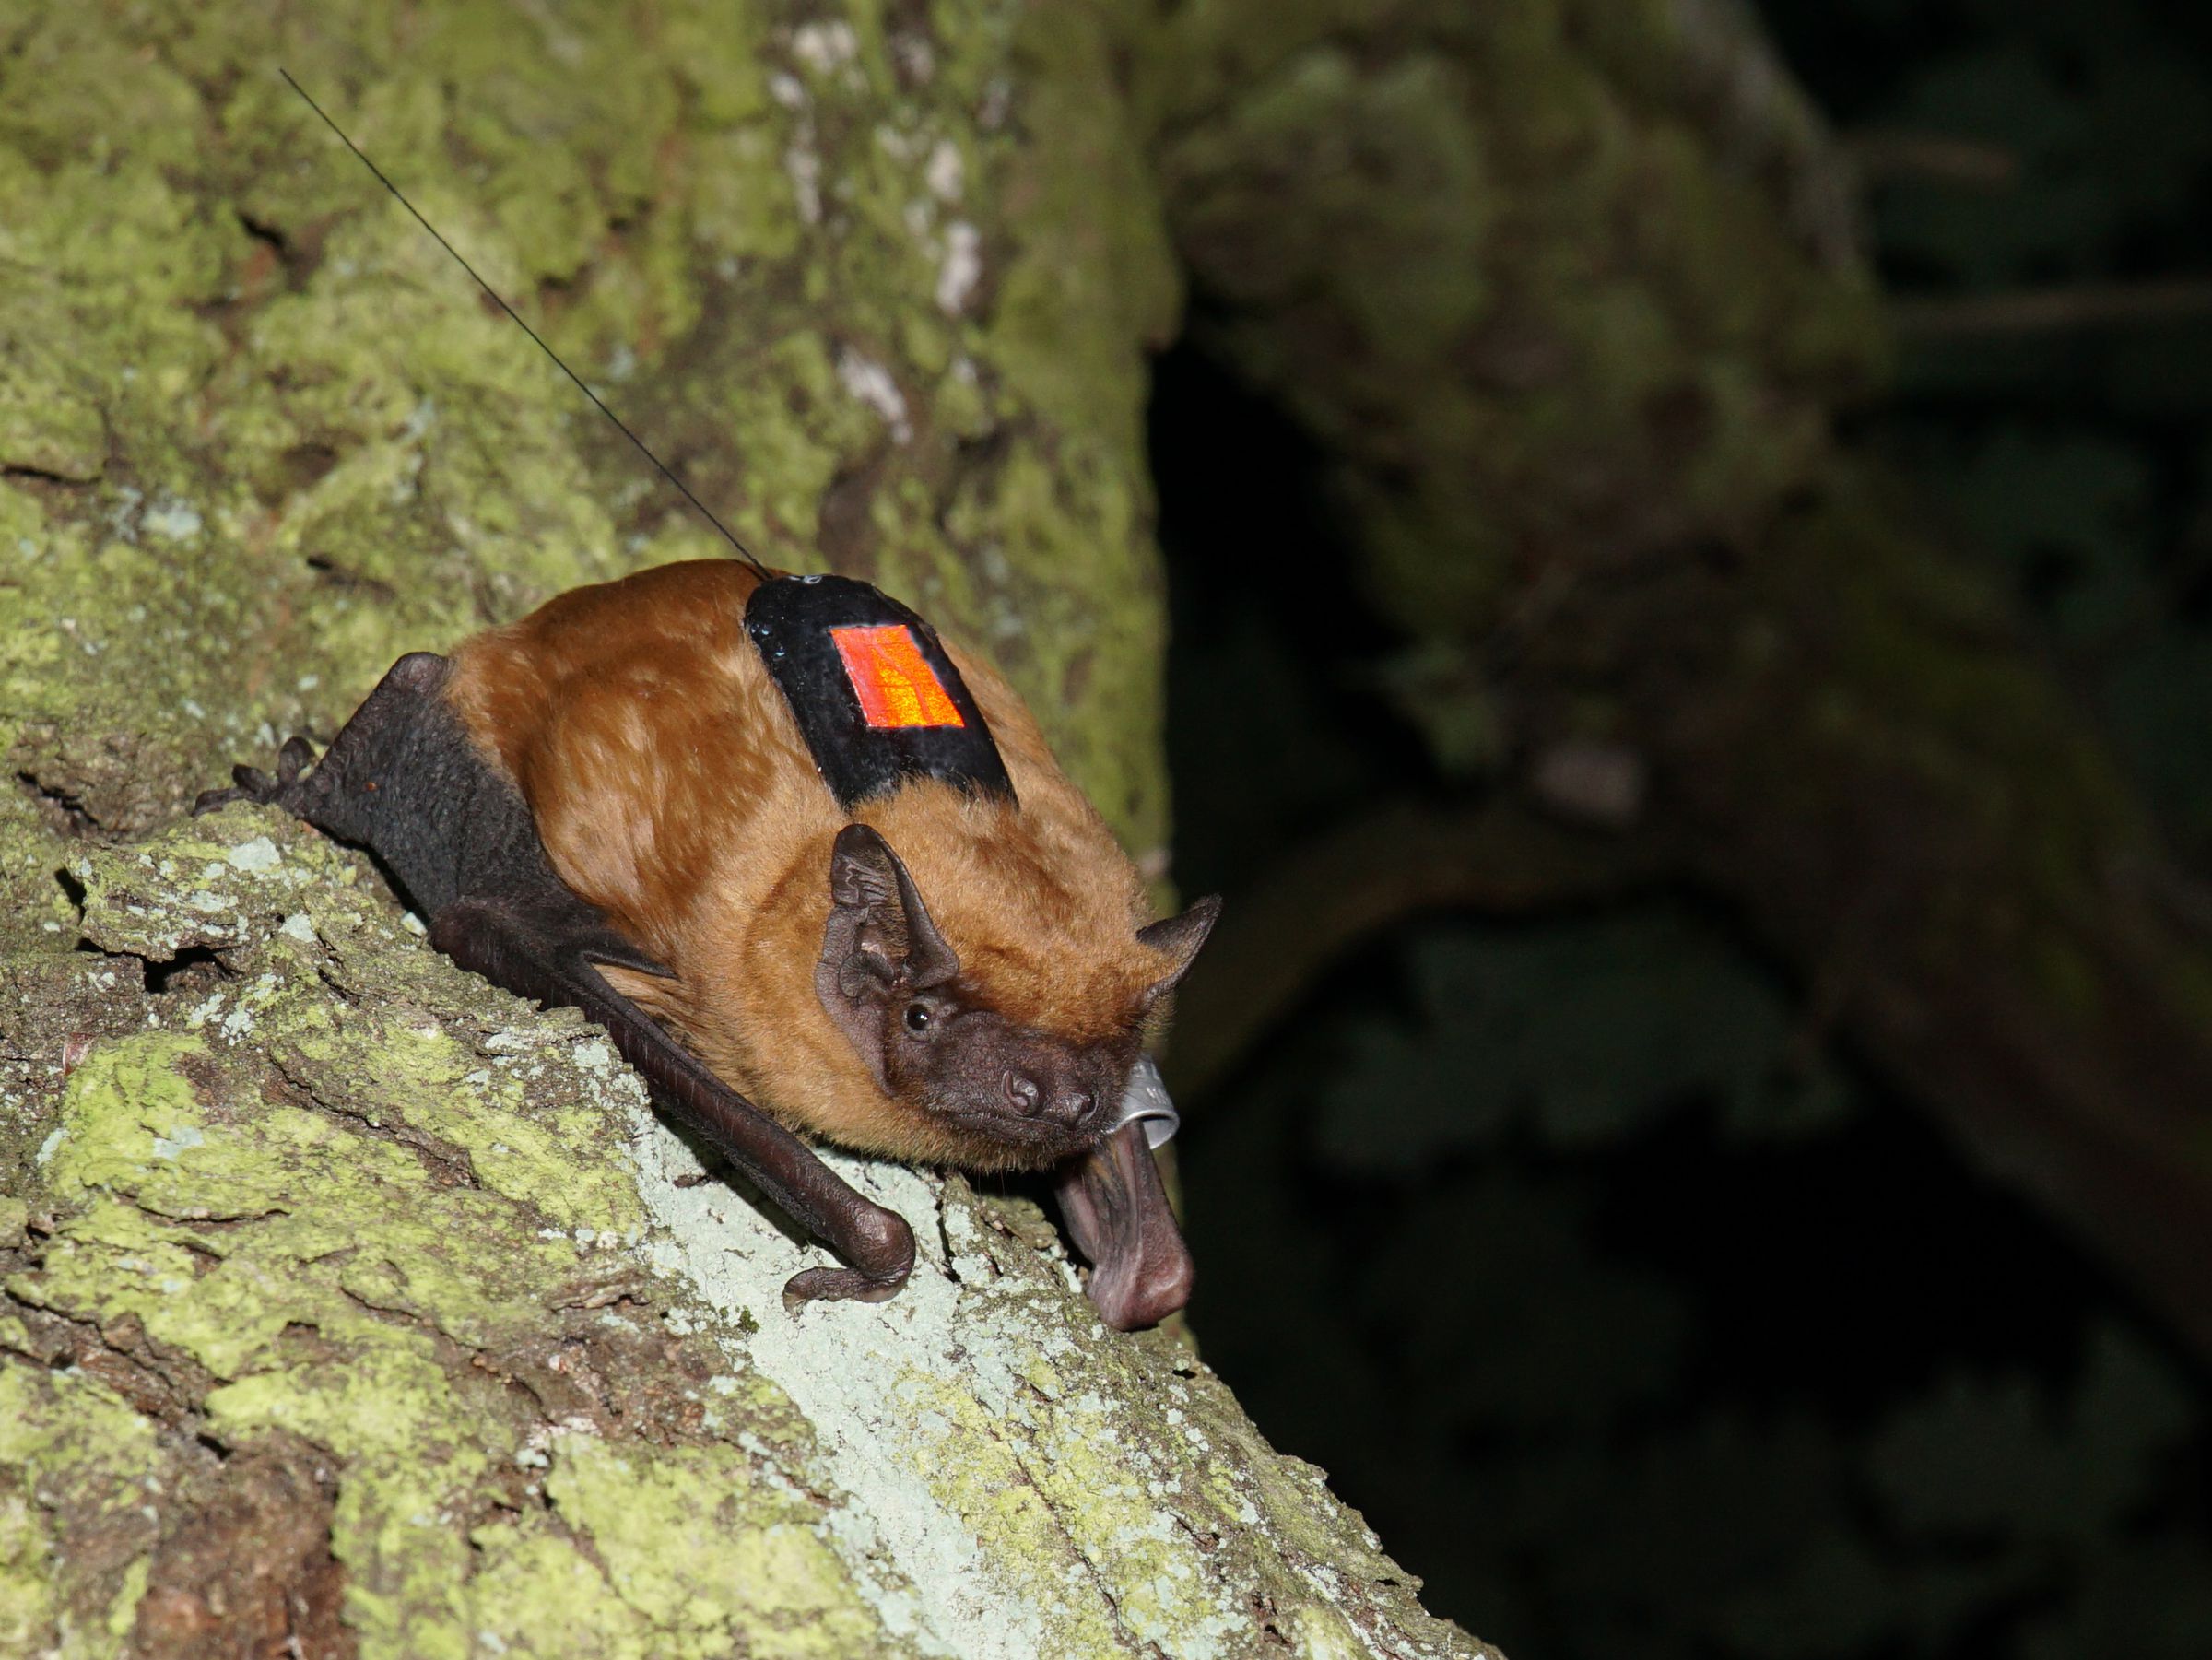 A bat with reddish fur sits on a tree branch with a small sensor on its back.